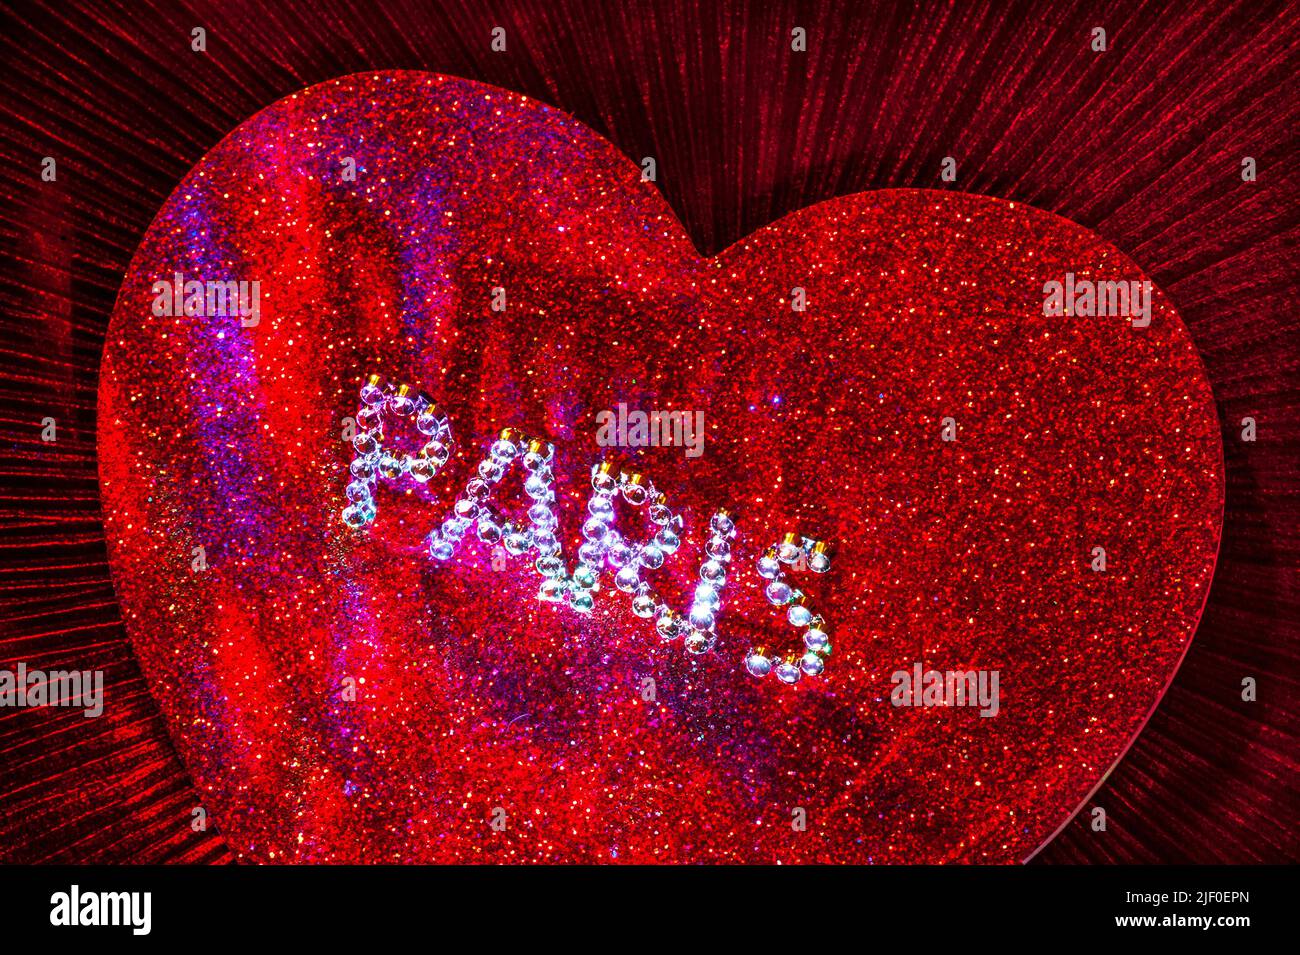 PARIS CITY LOVERS CONCEPT Sparkling jewel PARIS motif on red sparkling love heart with multicolored lighting Stock Photo